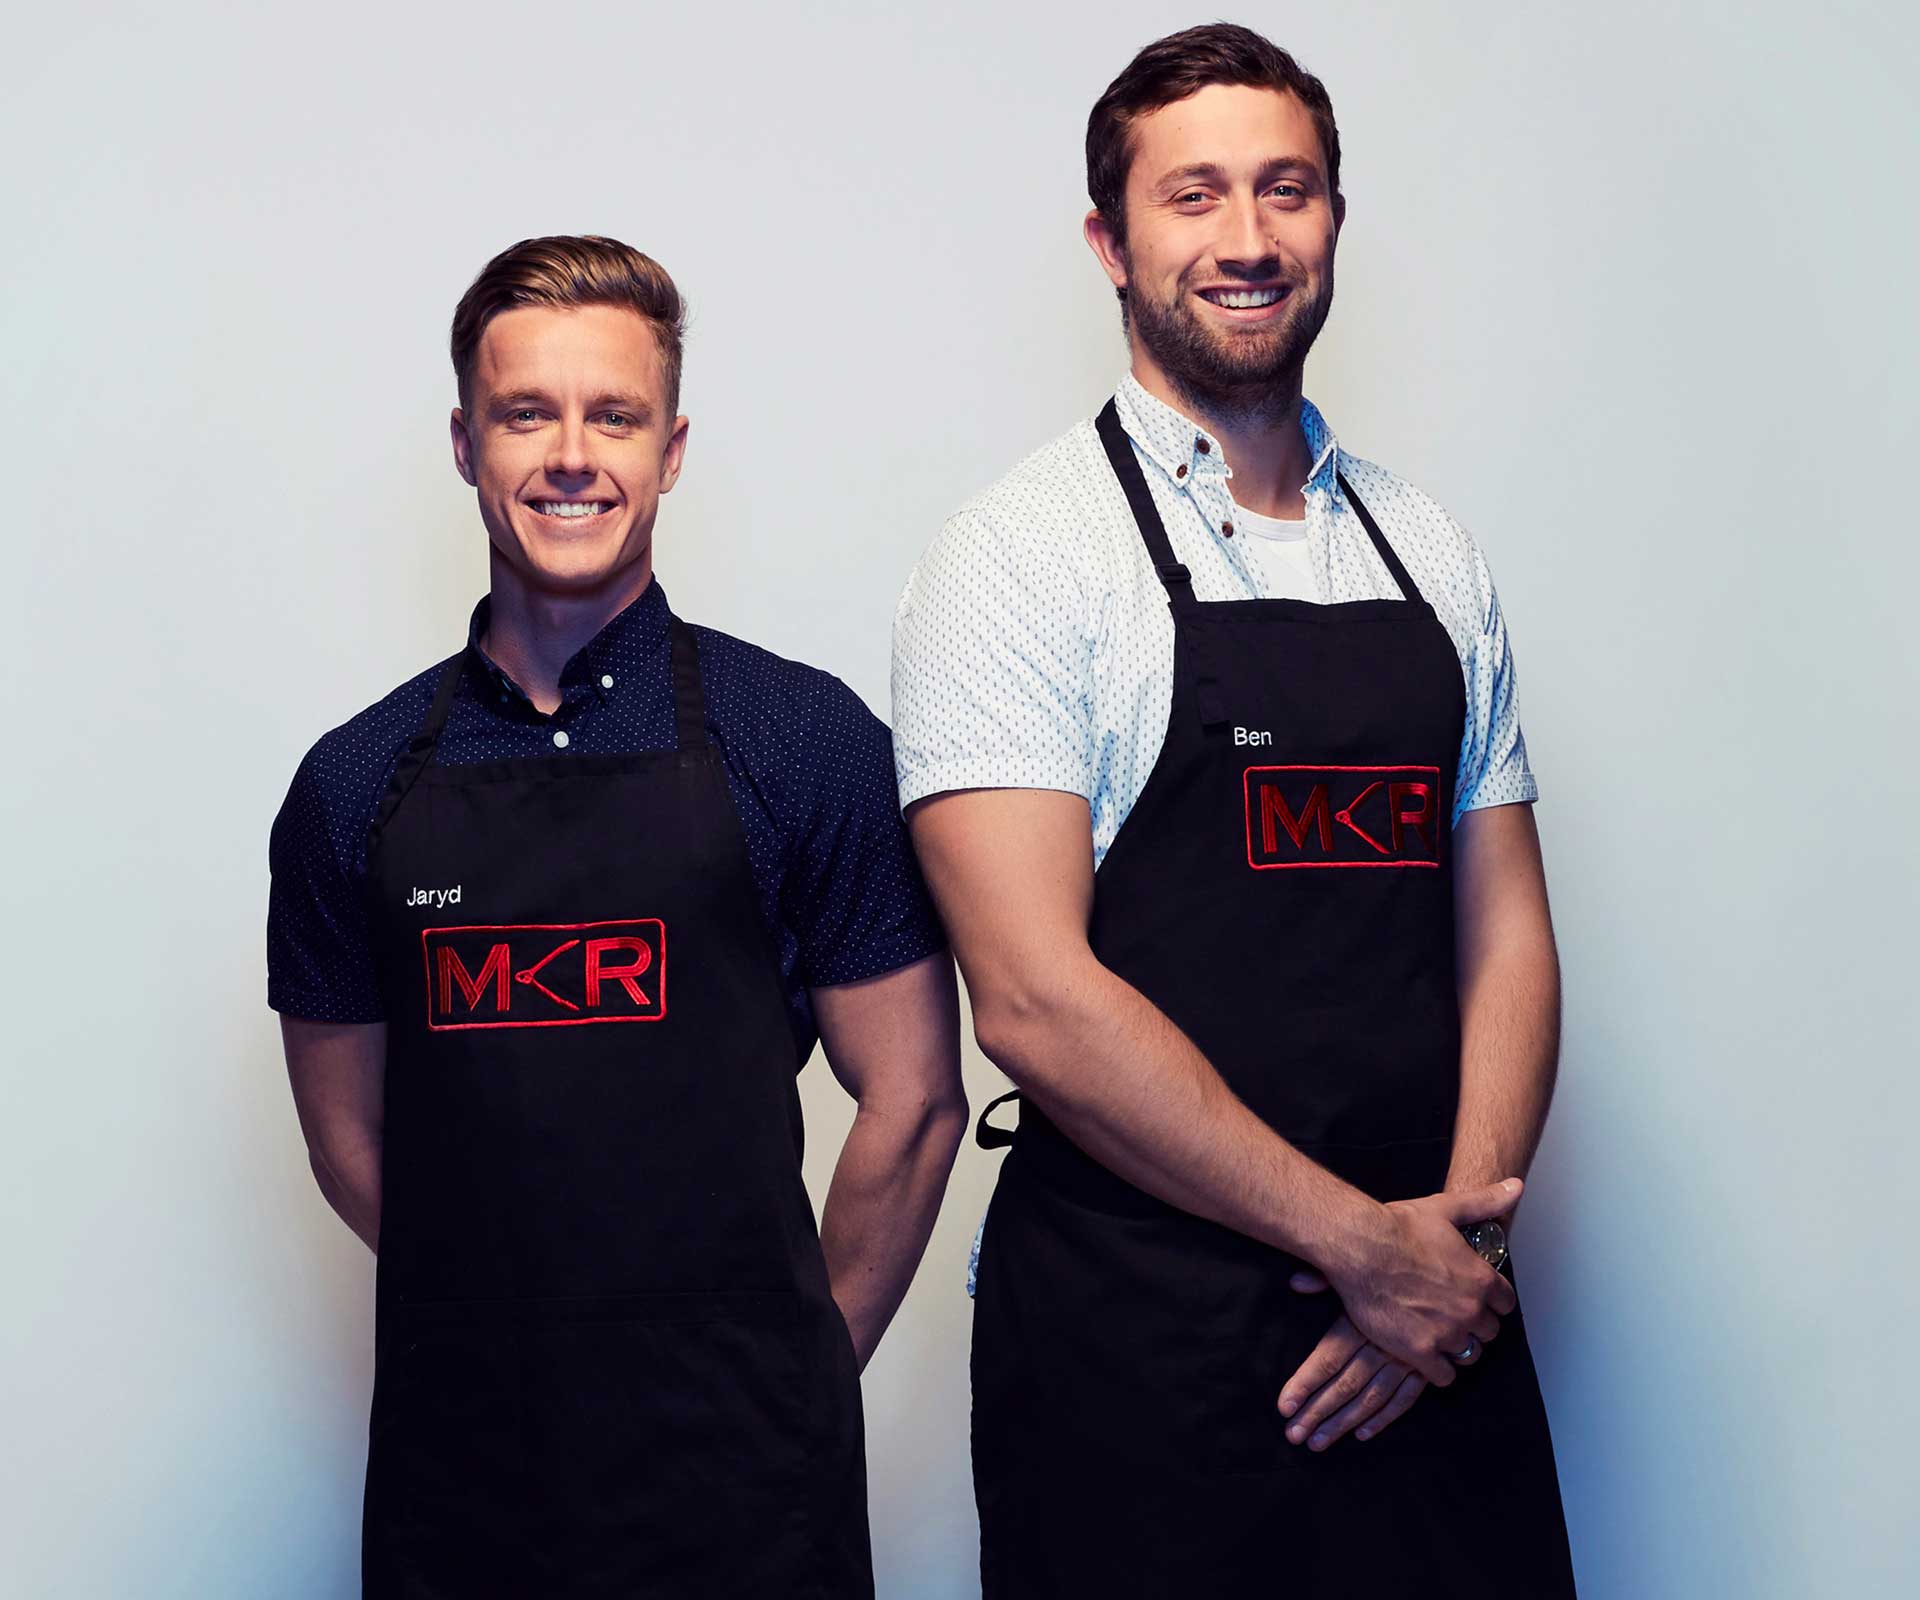 MKR NZ’s Jaryd and Ben answer some tough foodie questions